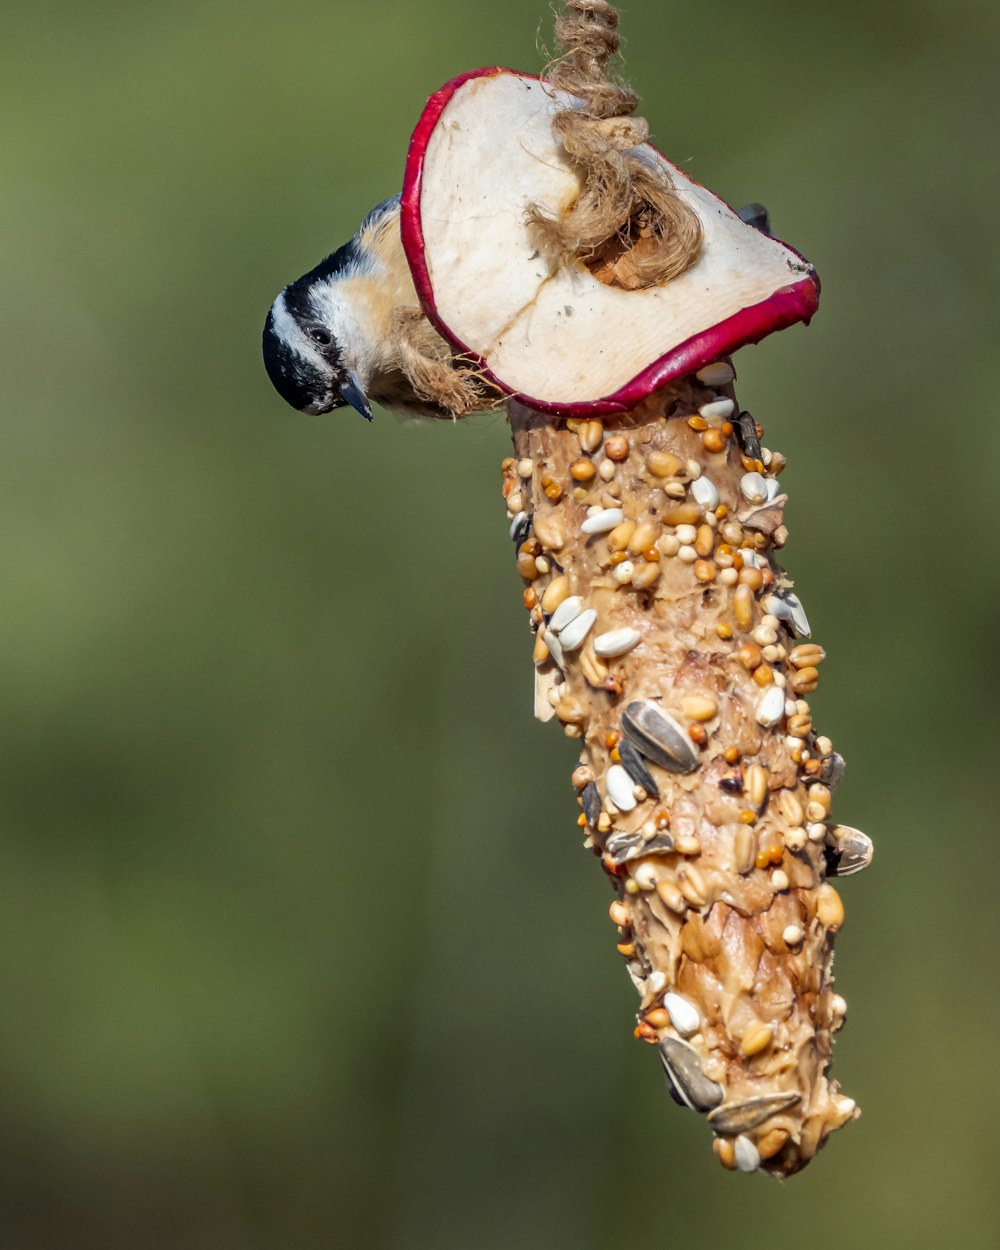 white and red bird on brown corn